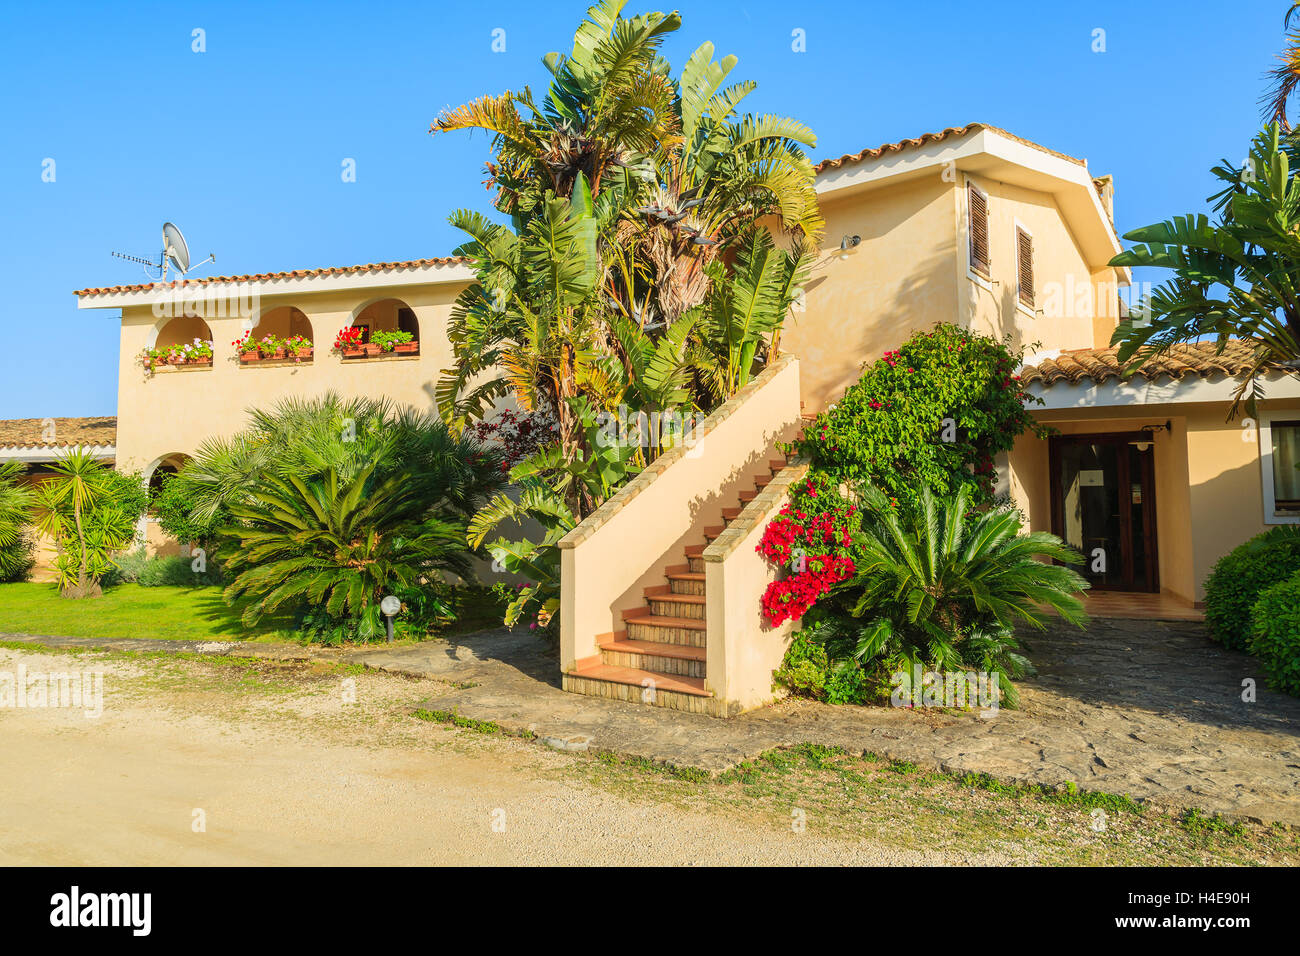 PORTO GIUNCO, SARDINIA - MAY 24, 2014: holiday apartment hotel in tropical gardens, Sardinia island, Italy. Southern part of the island is popular for beach vacation among Europeans. Stock Photo